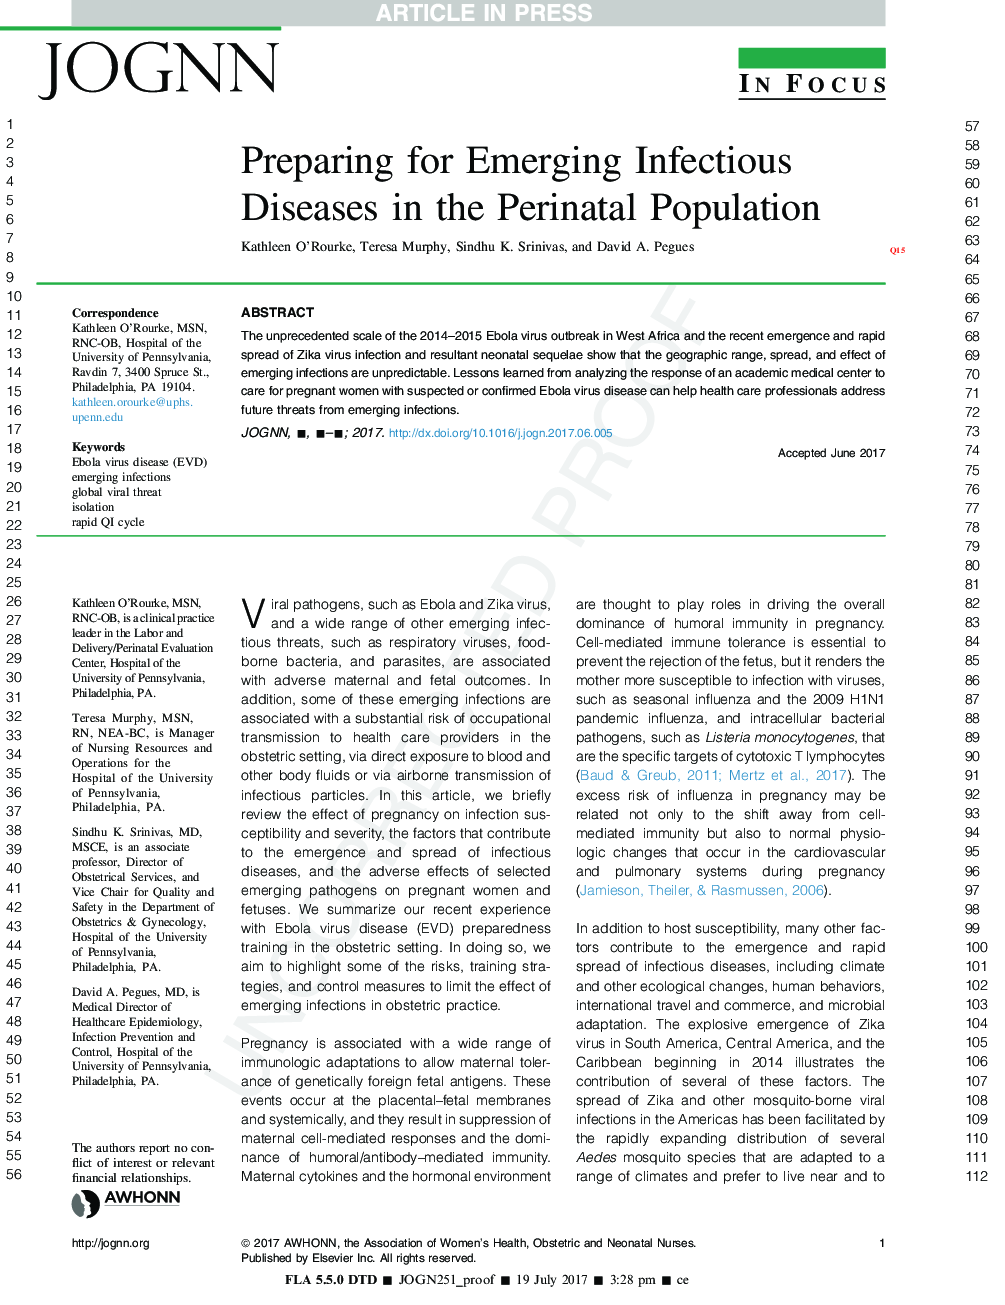 Preparing for Emerging Infectious Diseases in the Perinatal Population